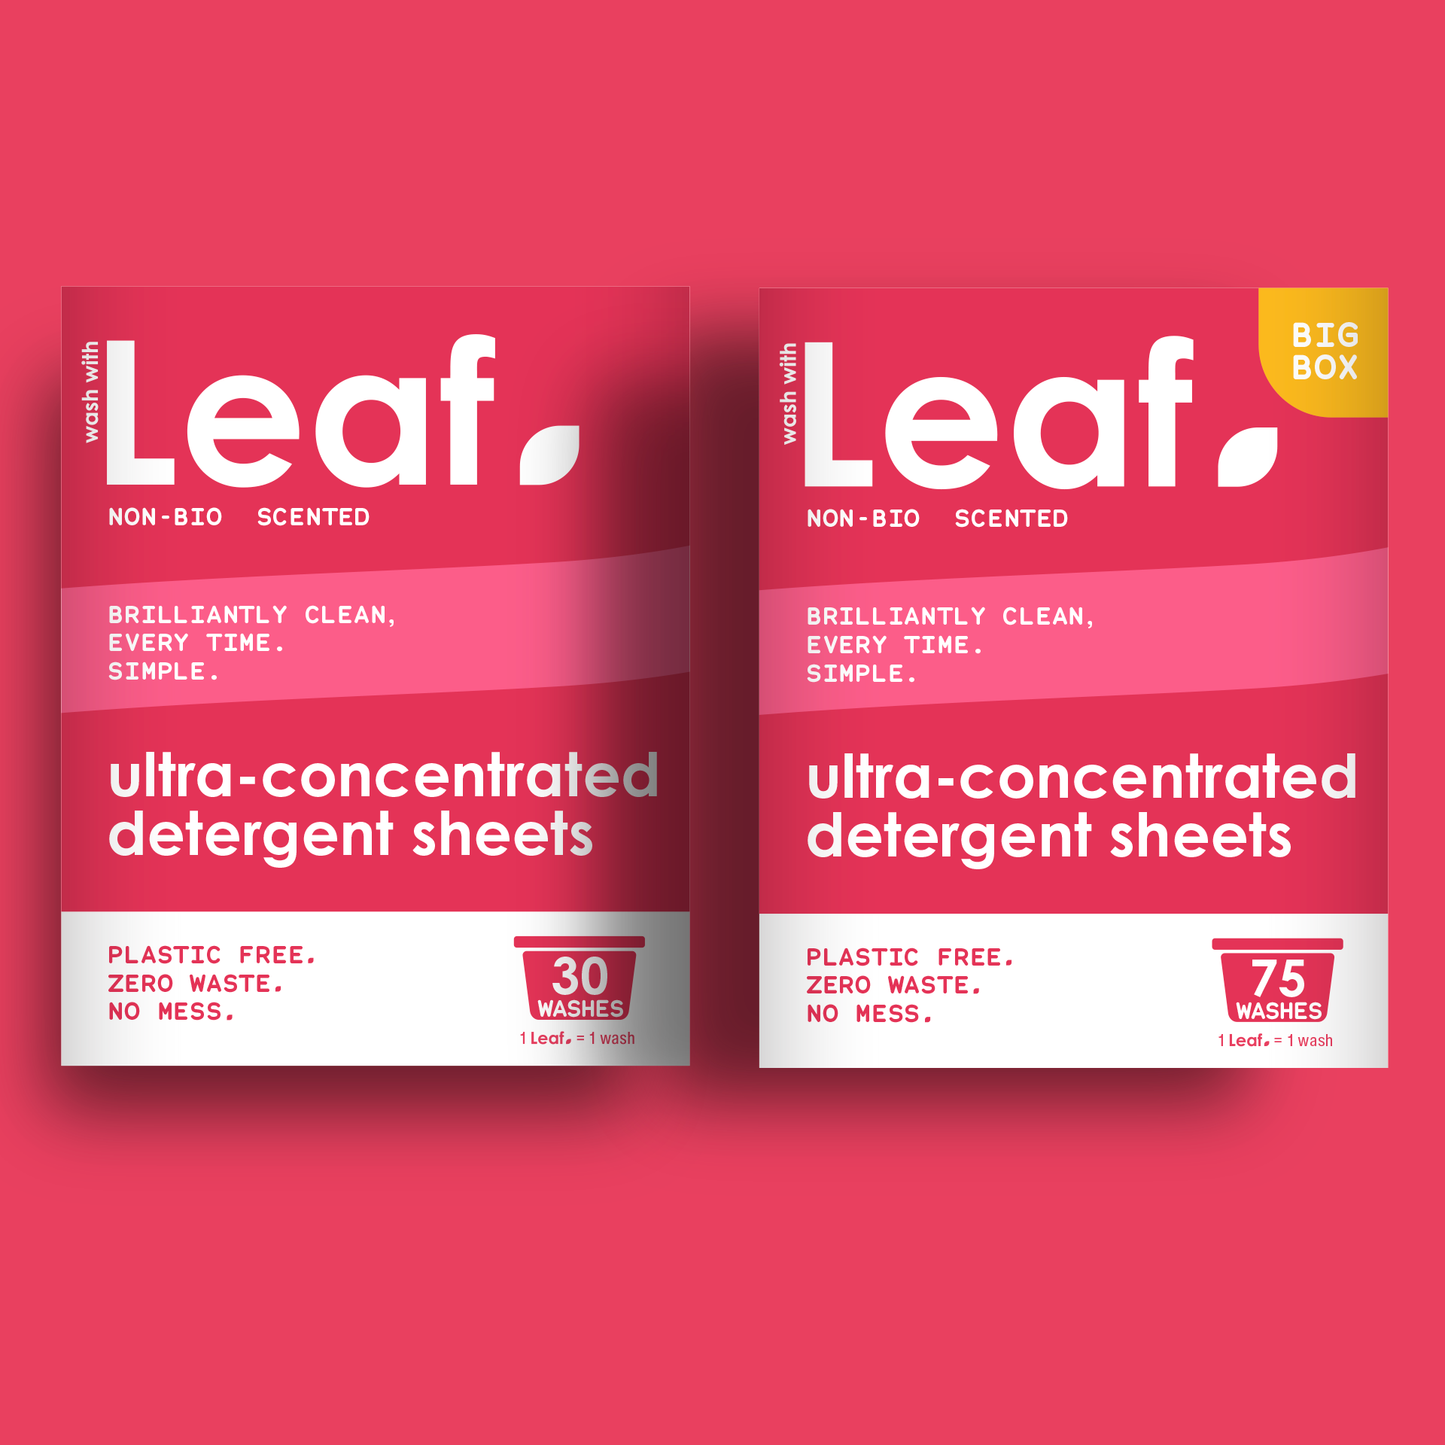 Wash with Leaf, non-bio detergent sheets. Comes in boxes of 30 and 75 sheets. 1 lLeaf = 1 wash. Plastic free, zero waste, no mess. 